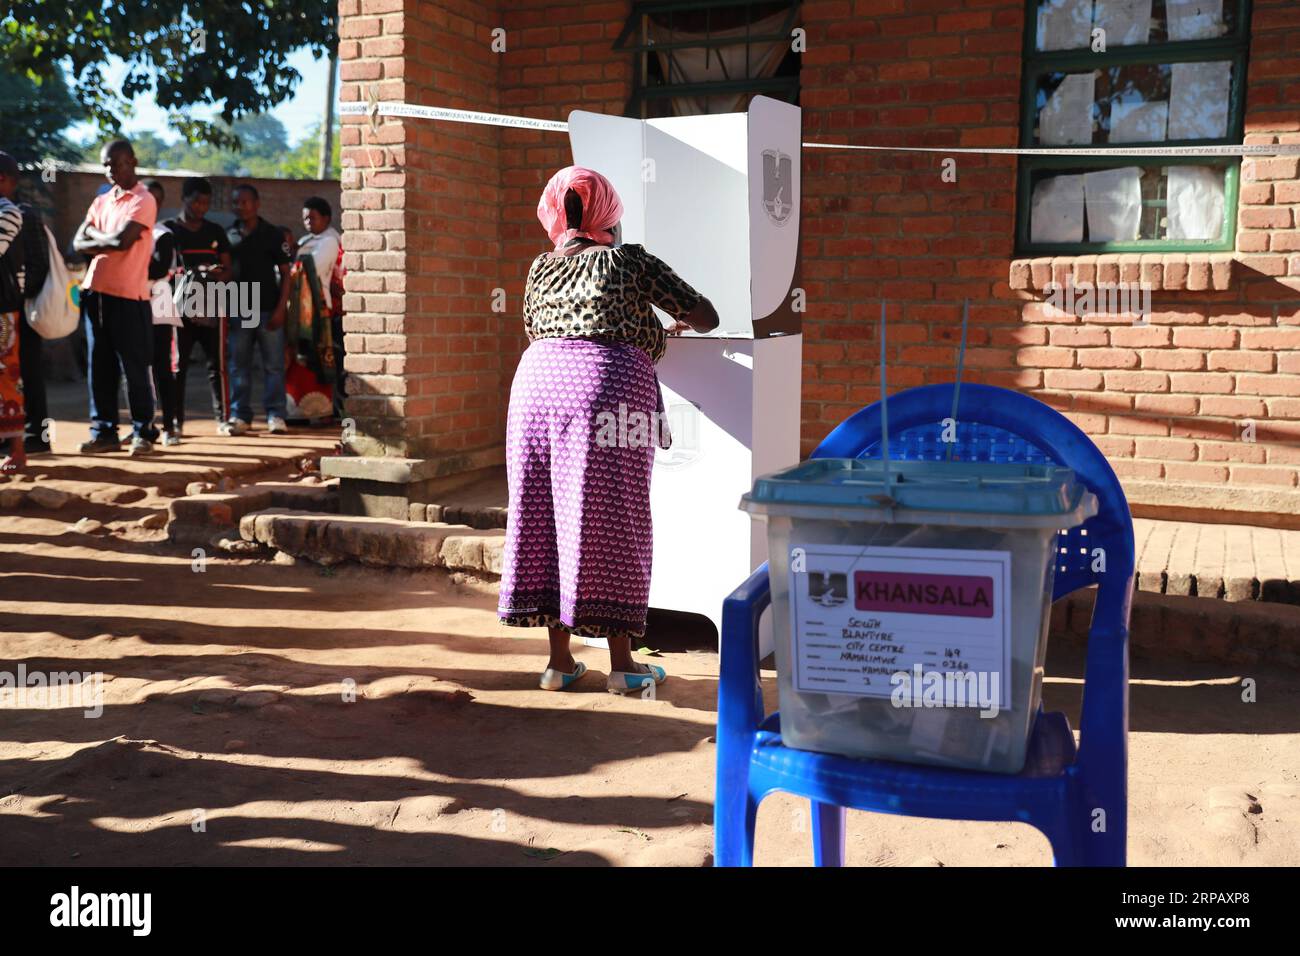 (190521) -- BLANTYRE, May 21, 2019 (Xinhua) -- A voter fills in a ballot at a polling station in Blantyre, Malawi, May 21, 2019. Malawians across the country on Tuesday queued up to cast ballots that will determine which party is to rule the country in the next five years. (Xinhua/Peng Lijun) MALAWI-BLANTYRE-ELECTION-VOTE PUBLICATIONxNOTxINxCHN Stock Photo